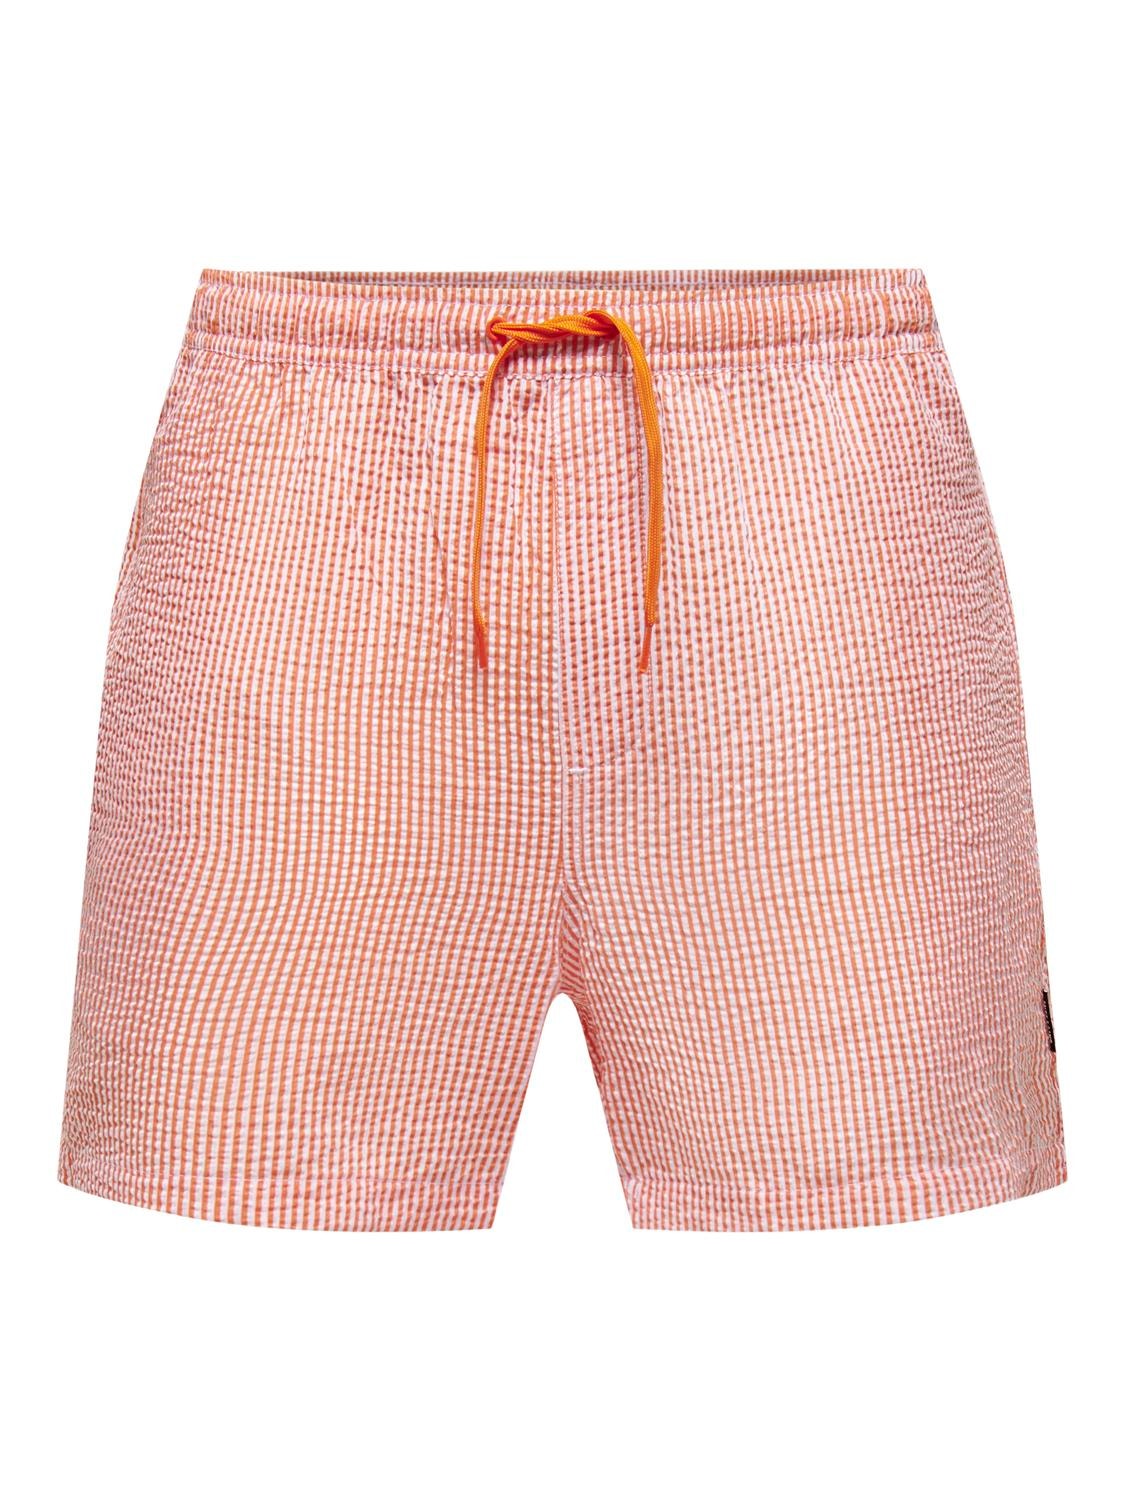 ONLY & SONS Printed swim shorts -Flame - 22021841